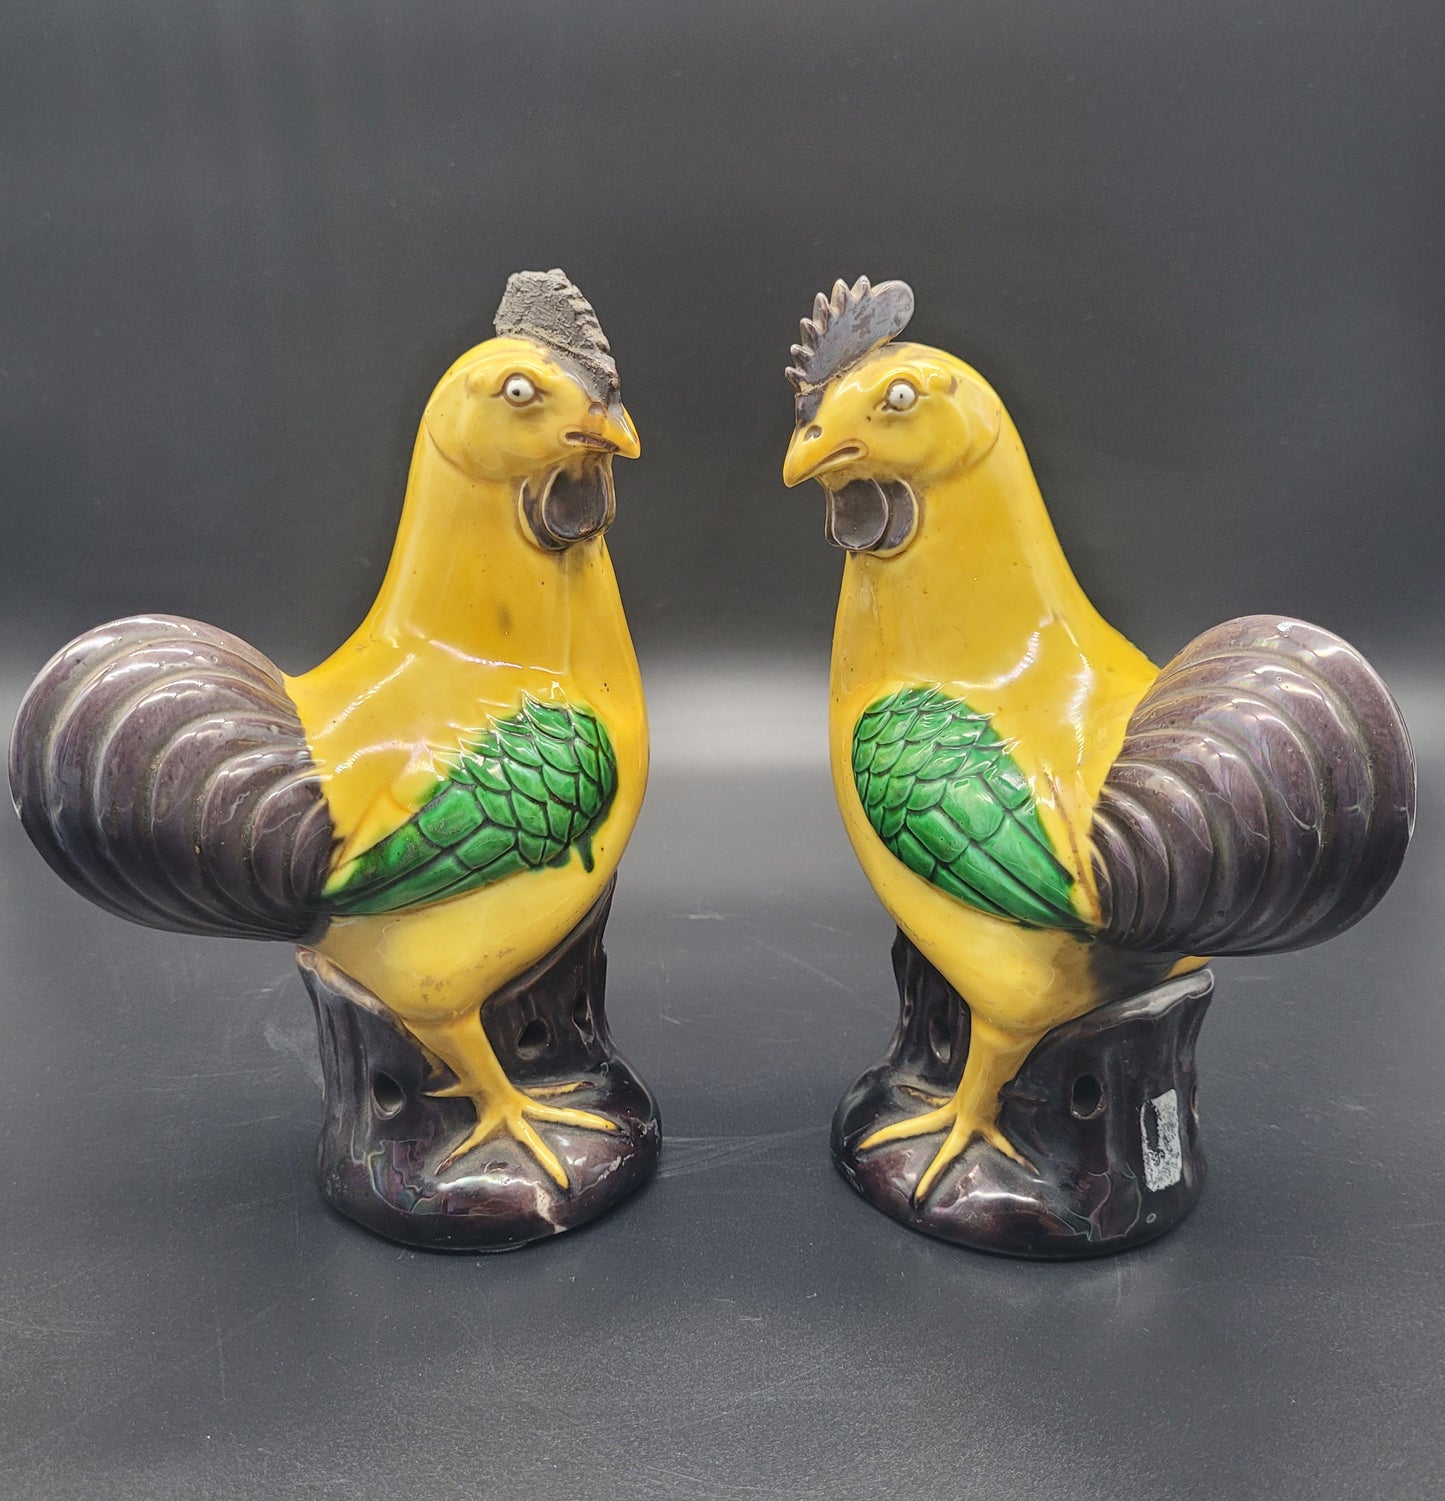 A Pair of Antique Chinese Qing Yellow Glazed Pottery Hens / Cockerels